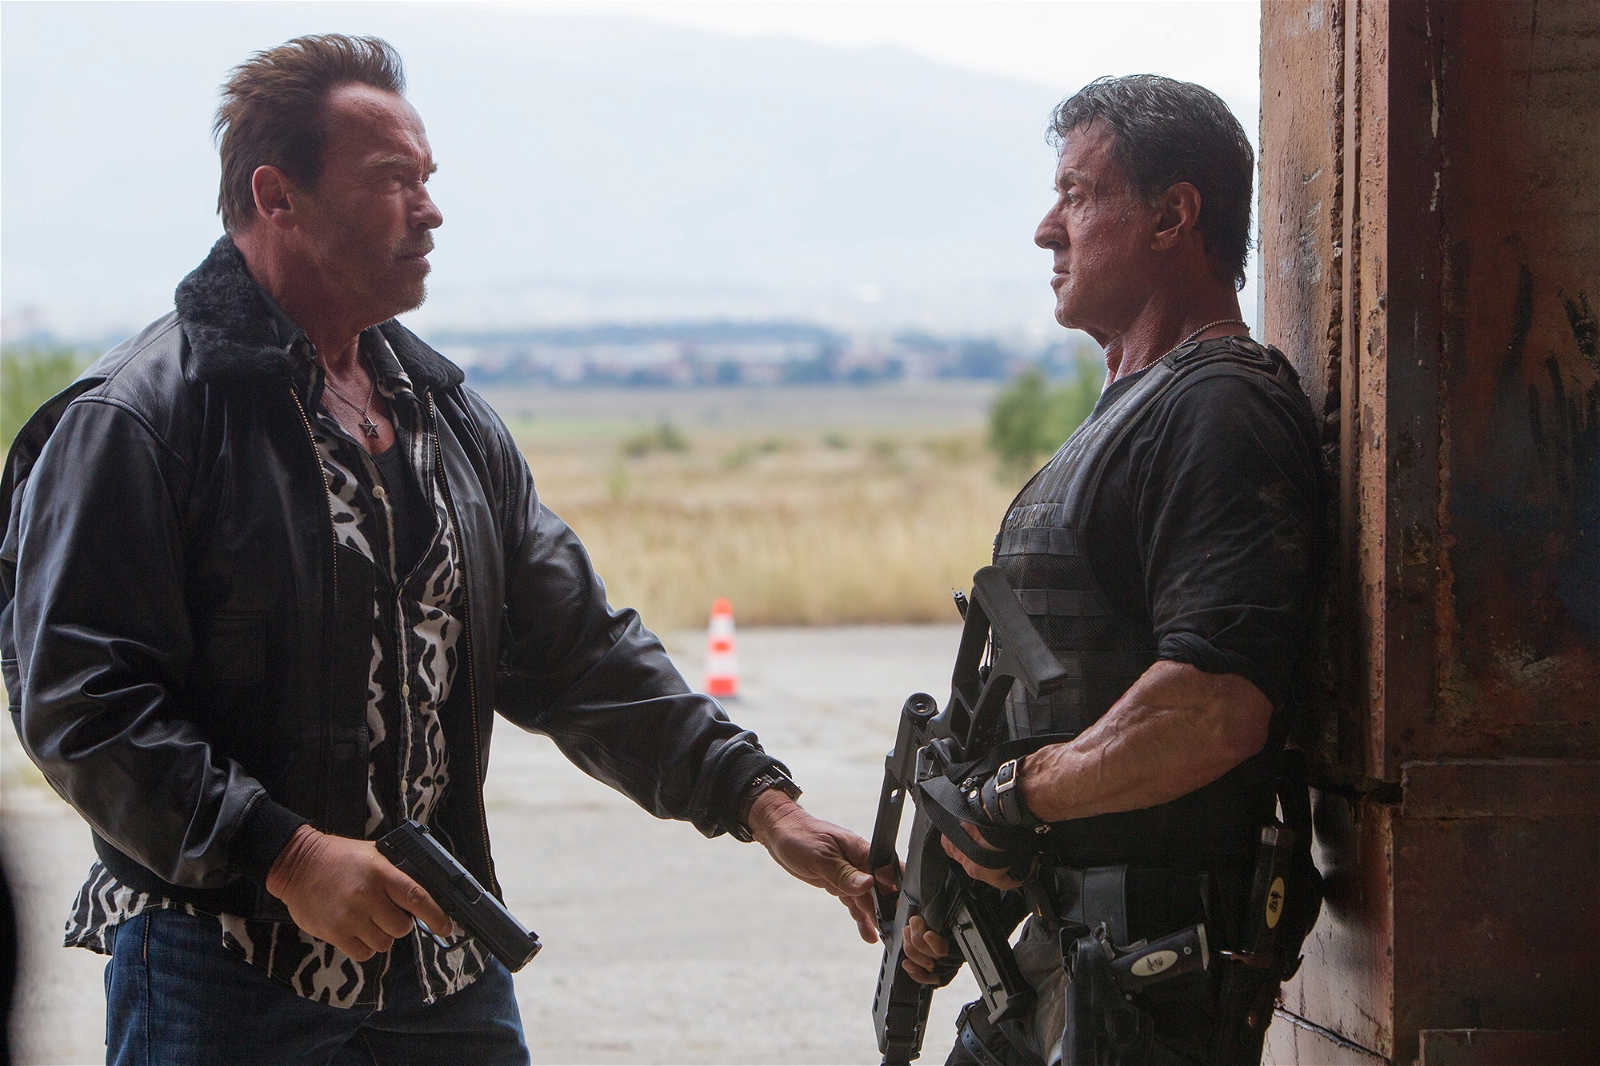 Arnold Schwarzenegger and Sylvester Stallone in 'The Expendables 3'